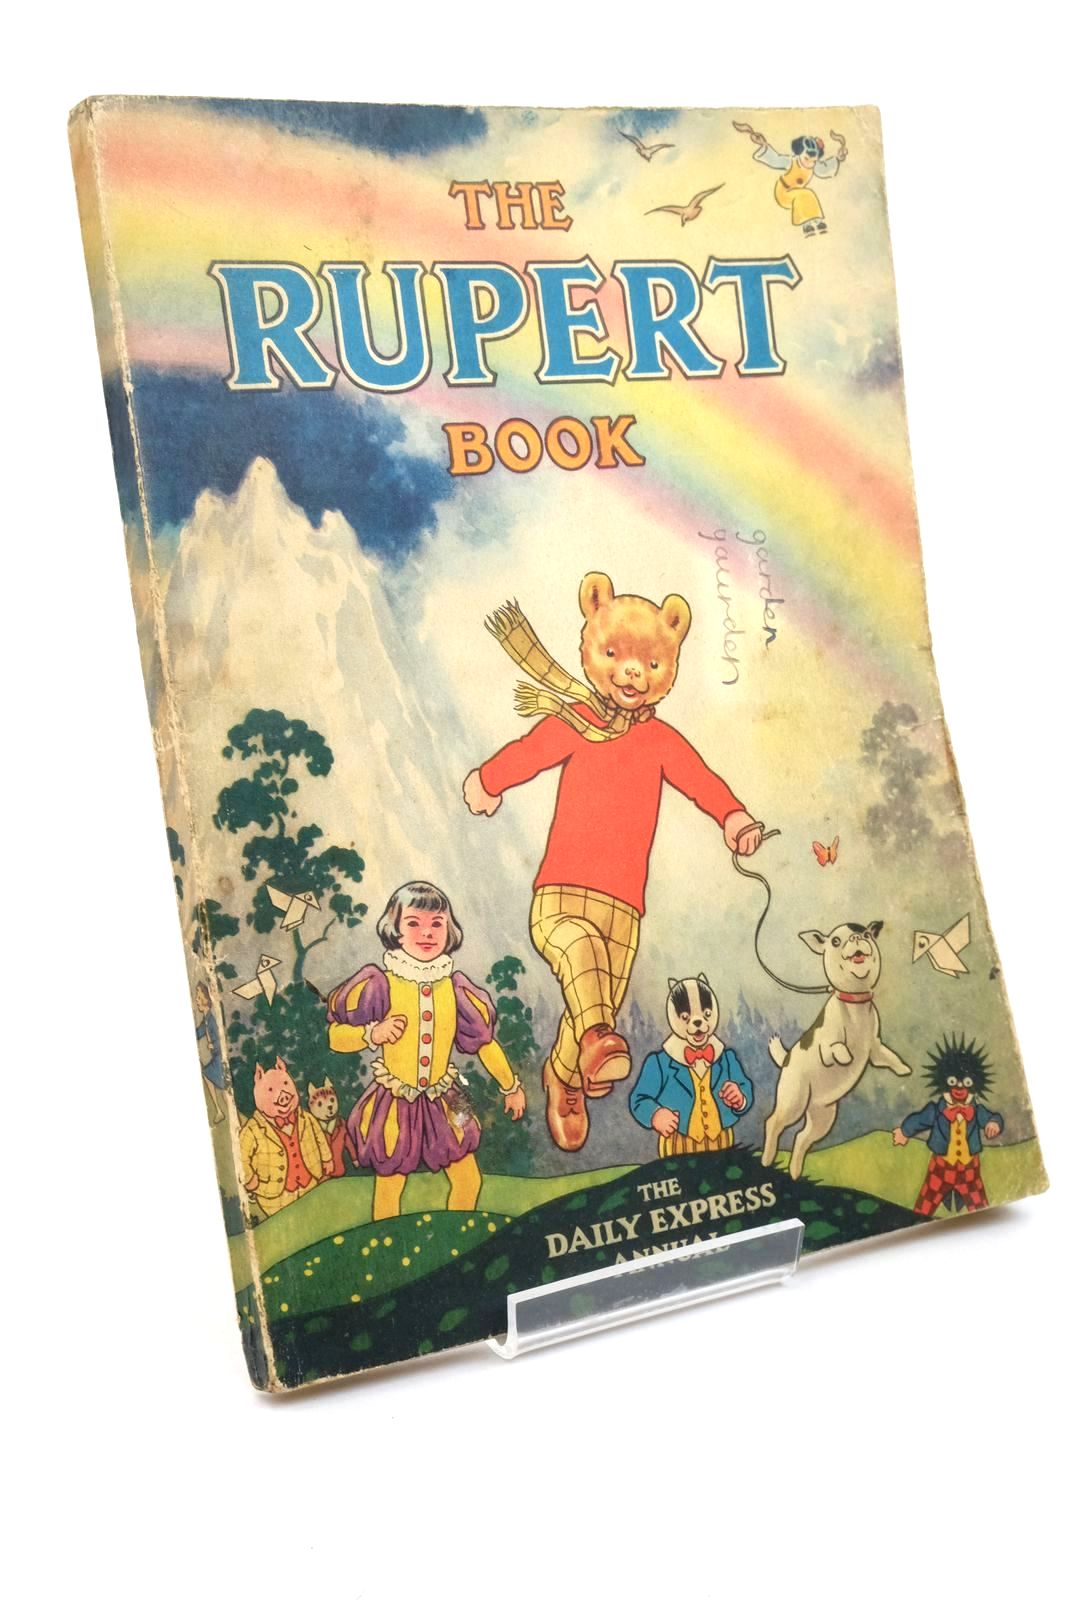 Photo of RUPERT ANNUAL 1948 - THE RUPERT BOOK written by Bestall, Alfred illustrated by Bestall, Alfred published by Daily Express (STOCK CODE: 1322734)  for sale by Stella & Rose's Books